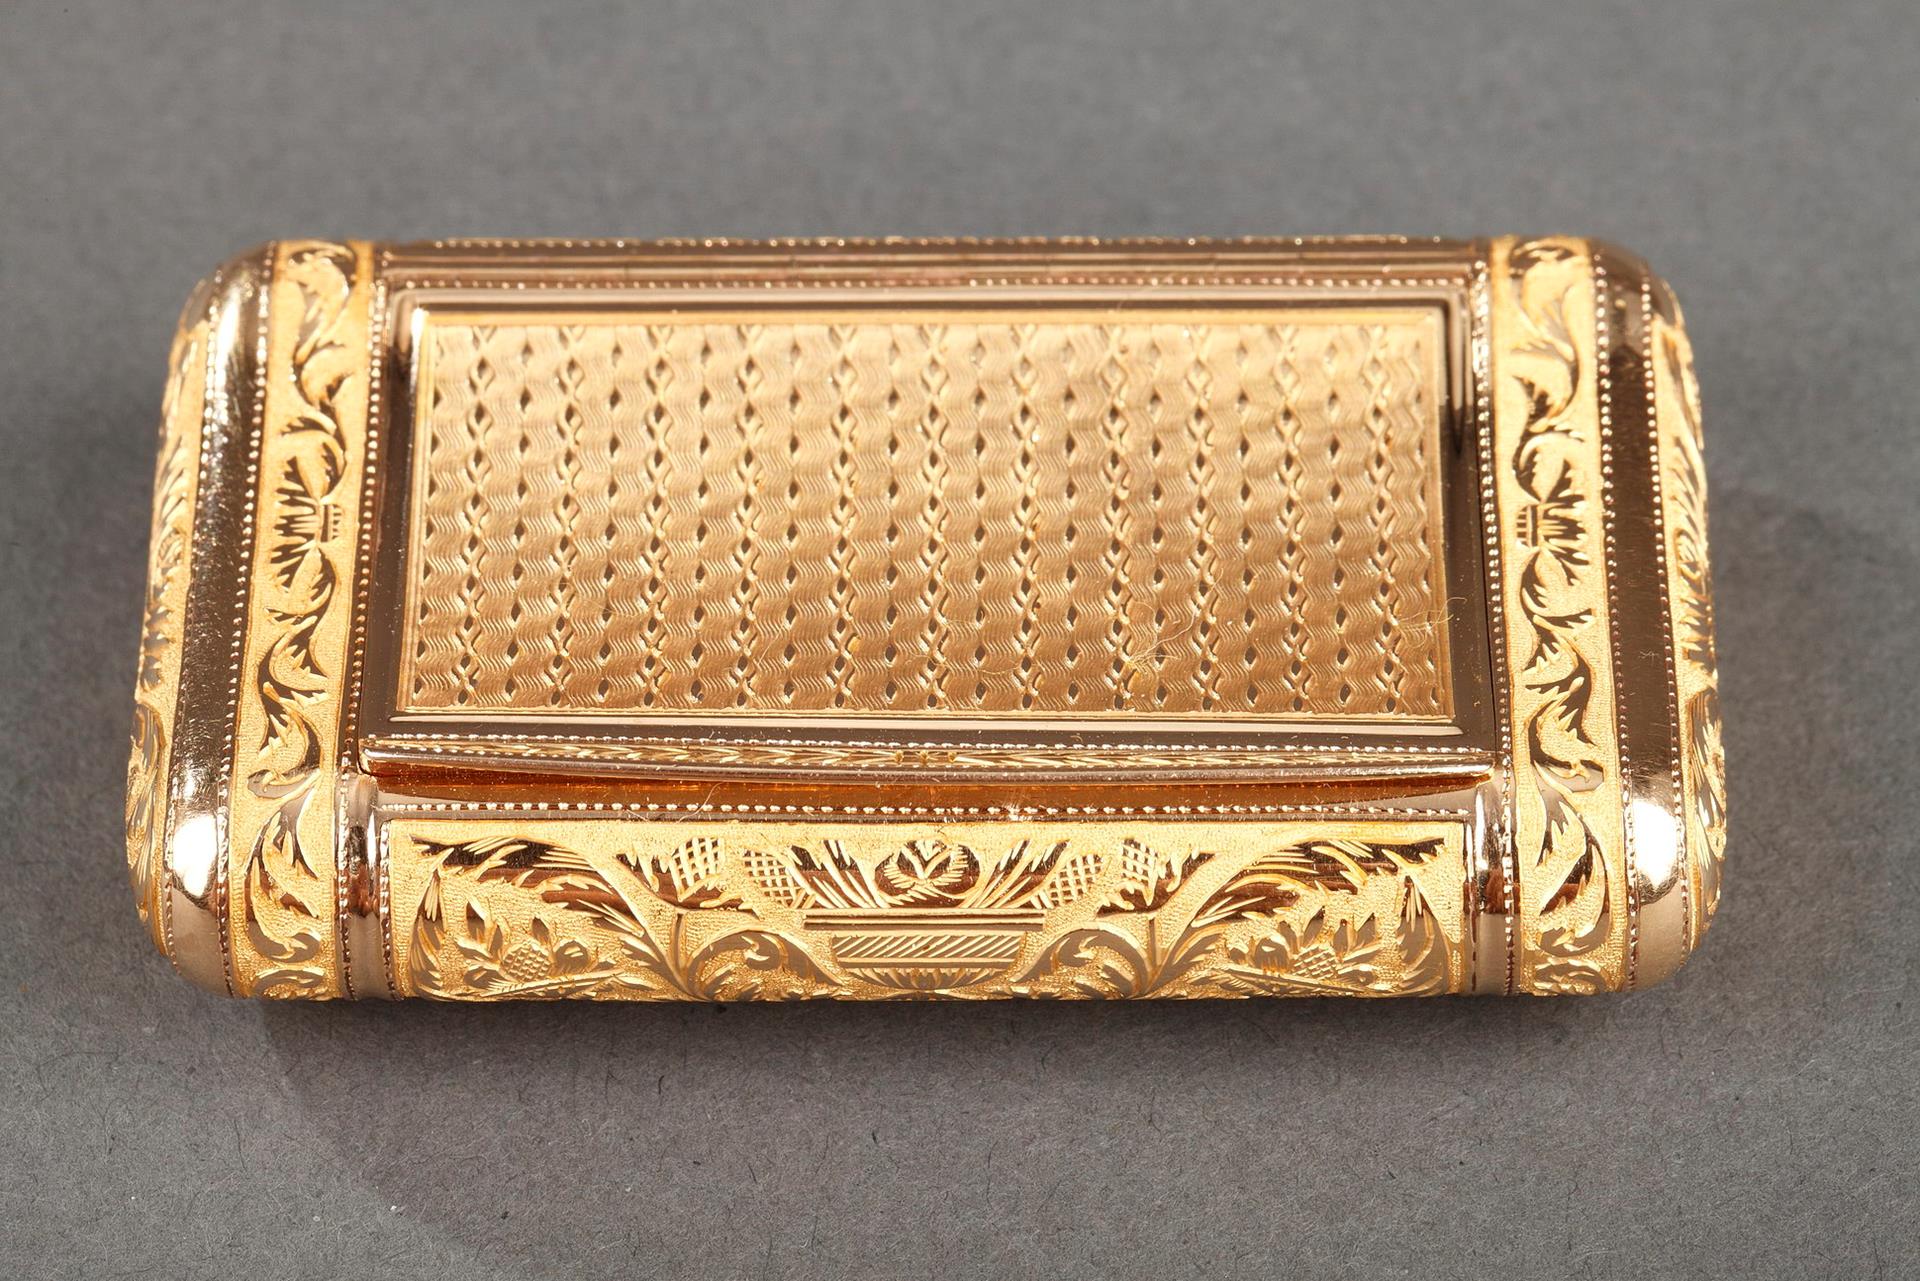 An early 19th century French gold snuff-box. 